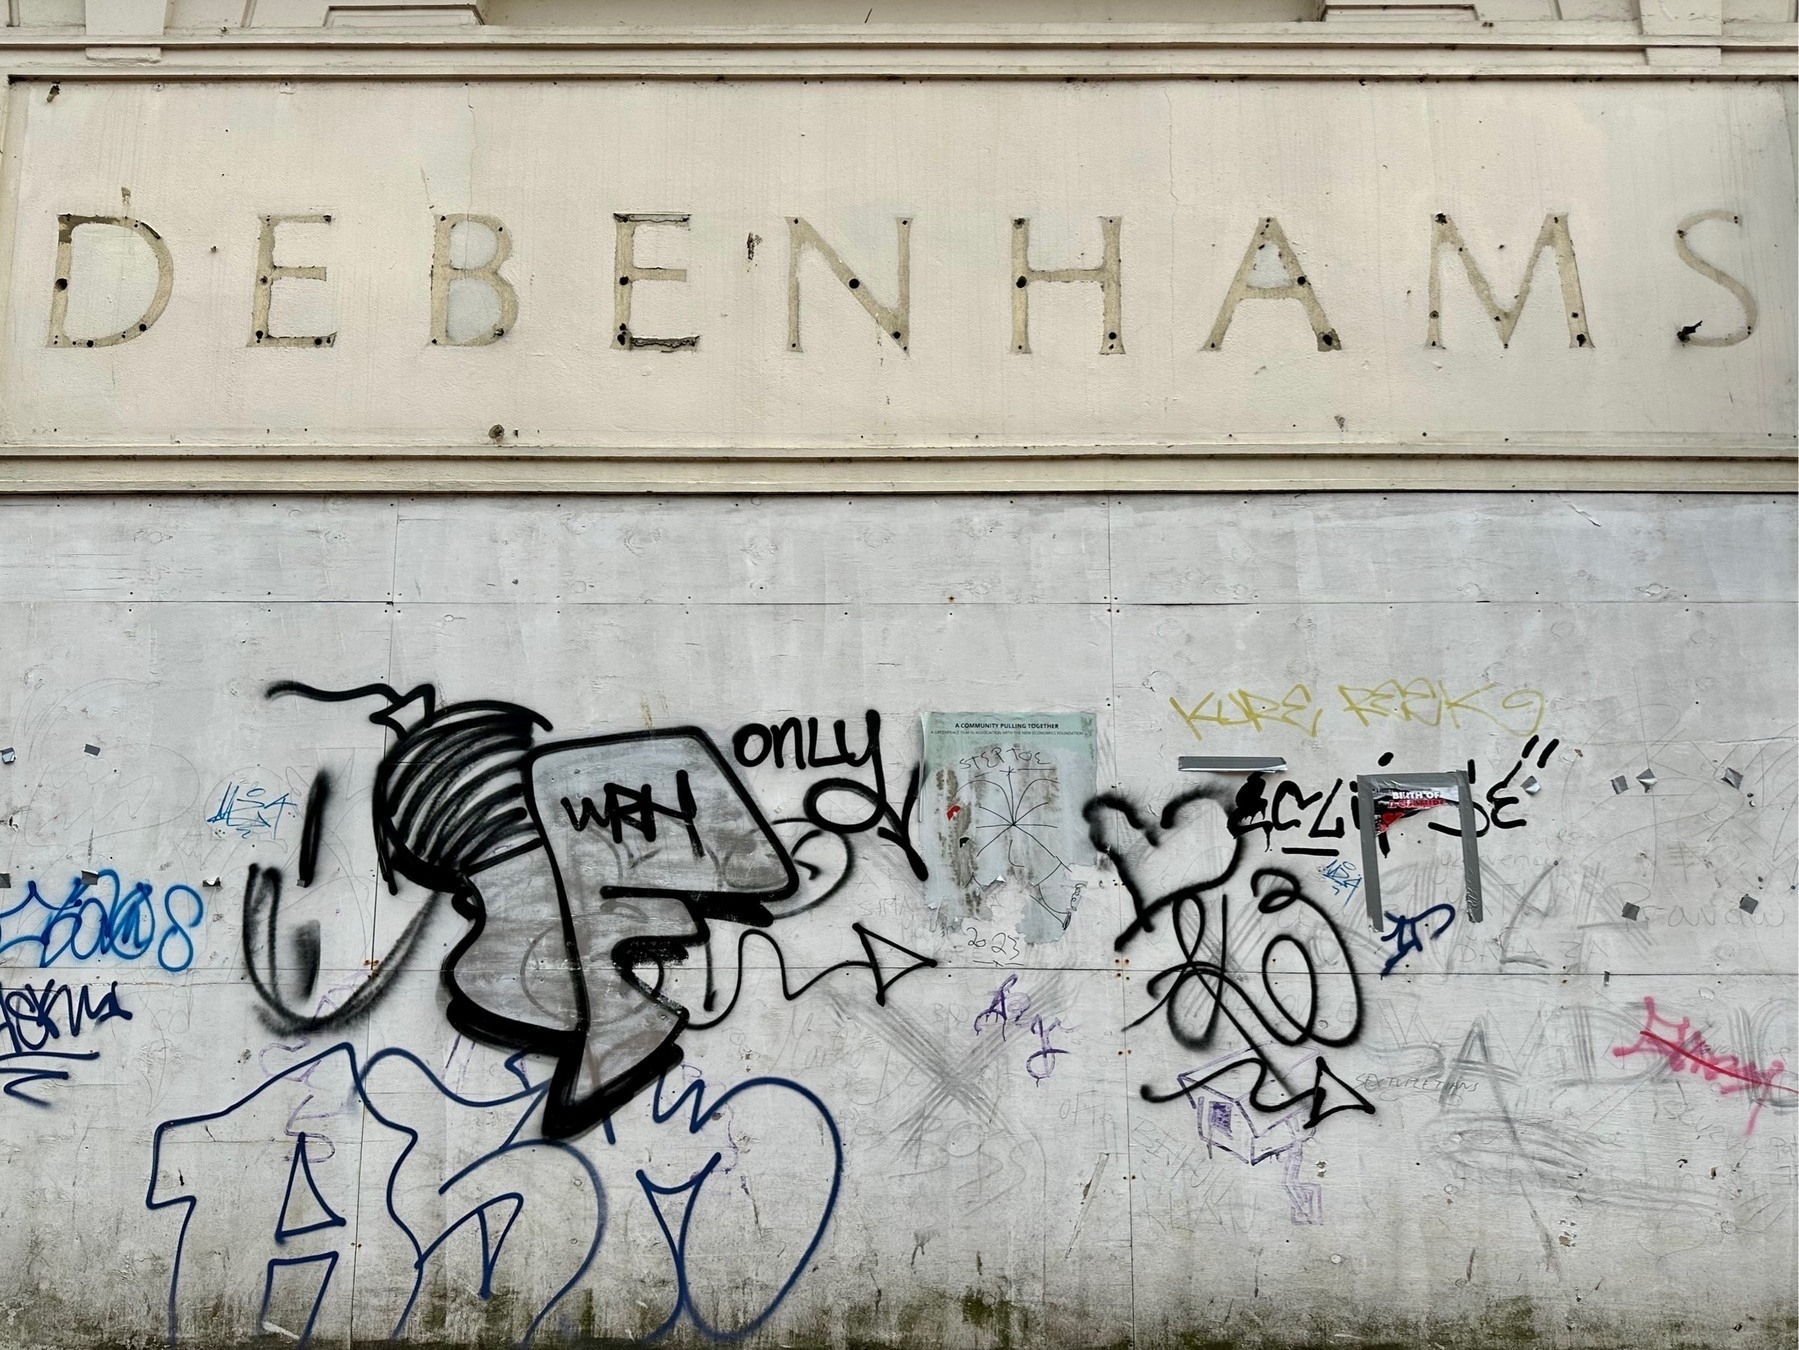 The indented letters making up an old Debenhams shop sign, with graffiti on the boards covering the old windows below